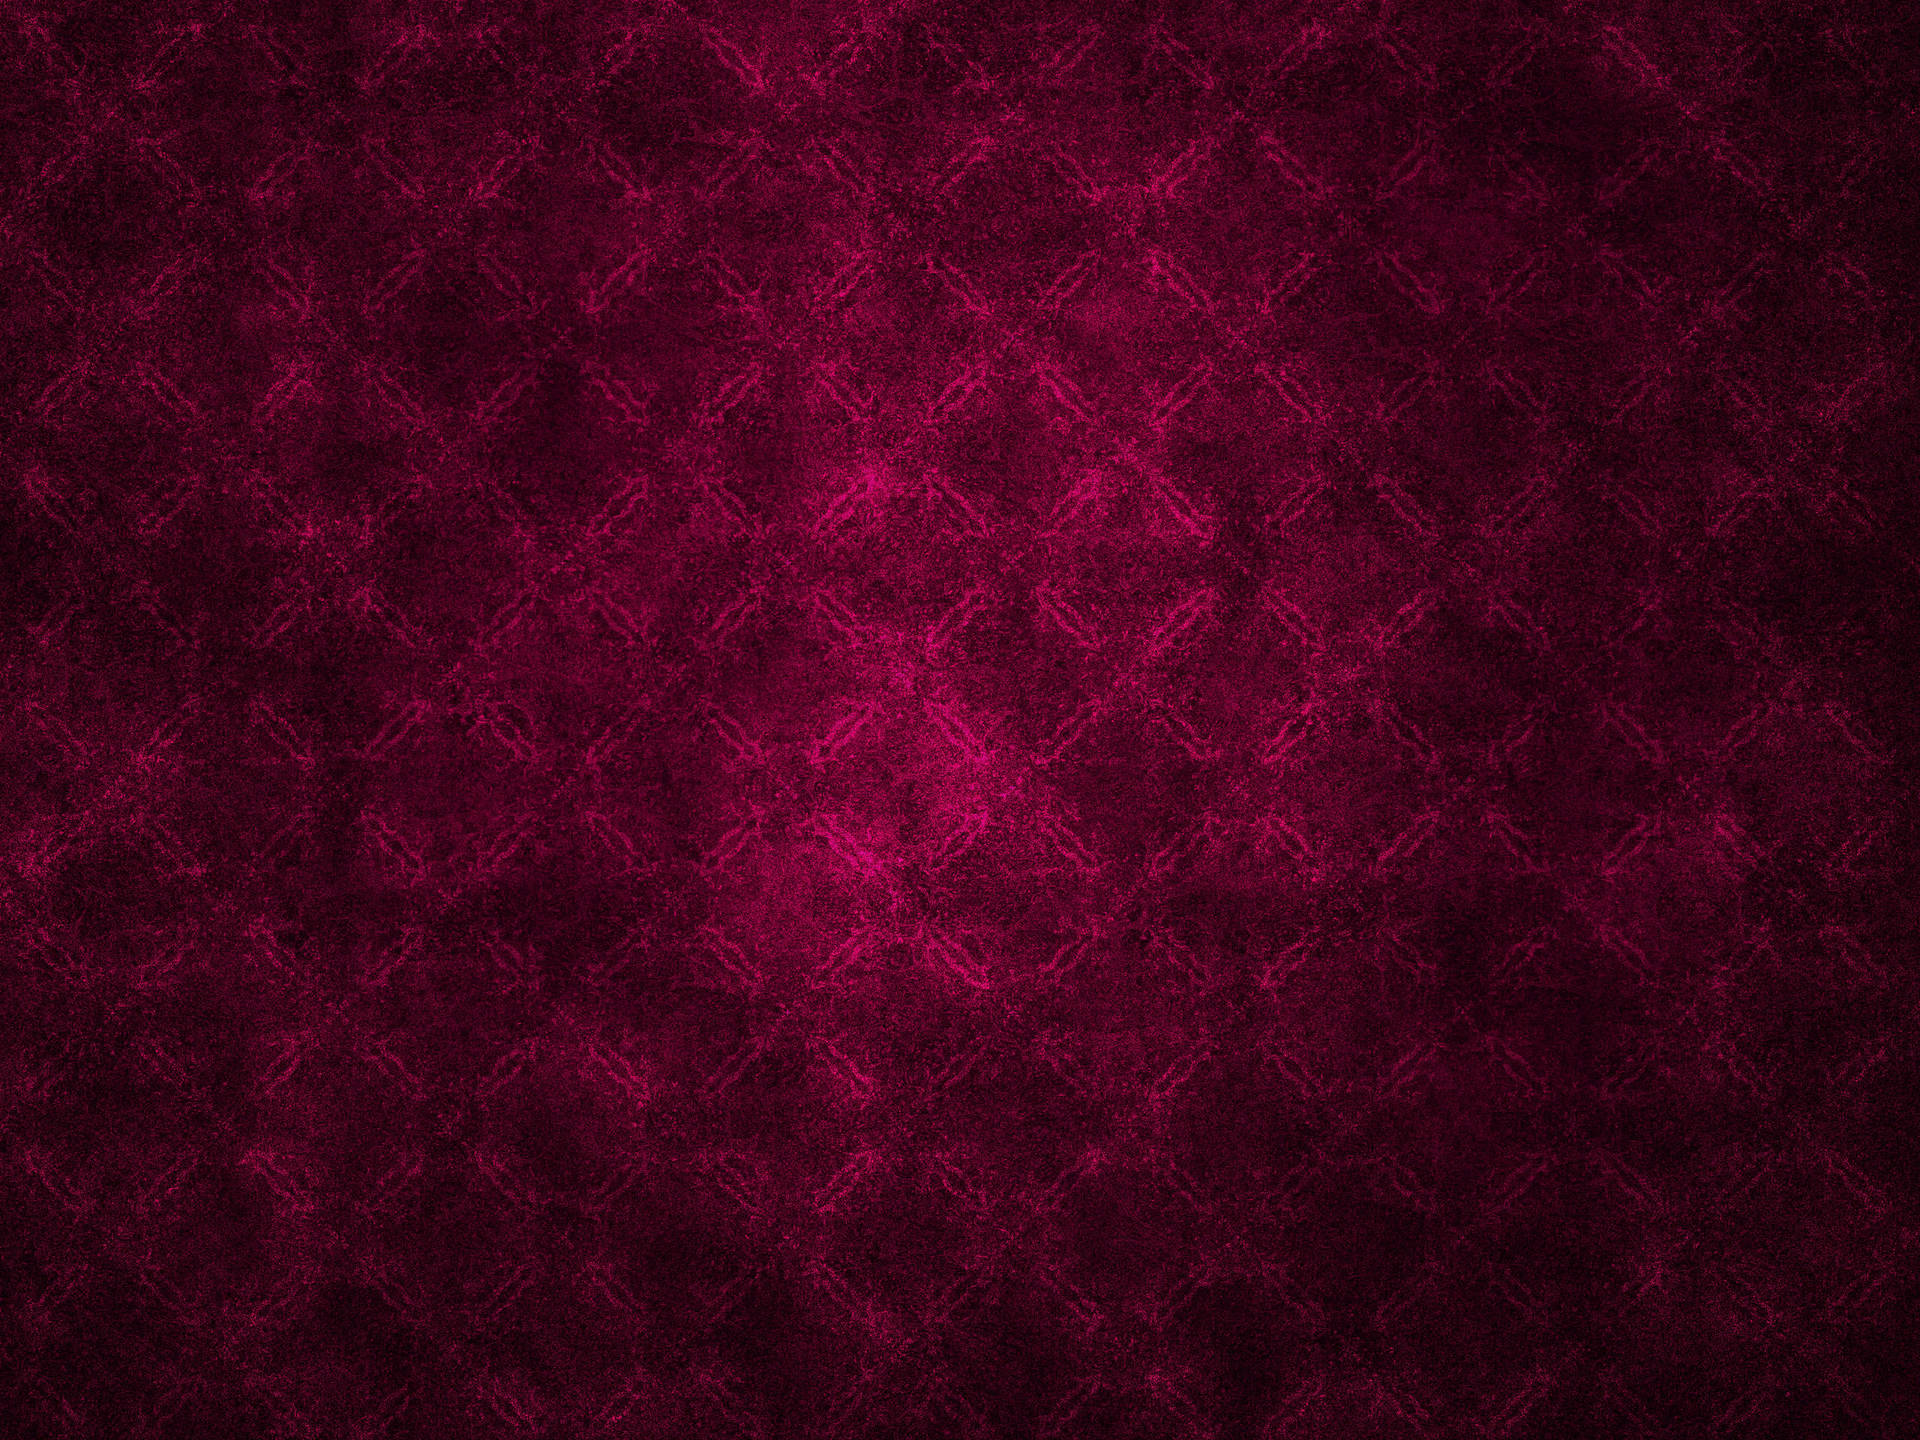 Pattern 5120X3840 Wallpaper and Background Image